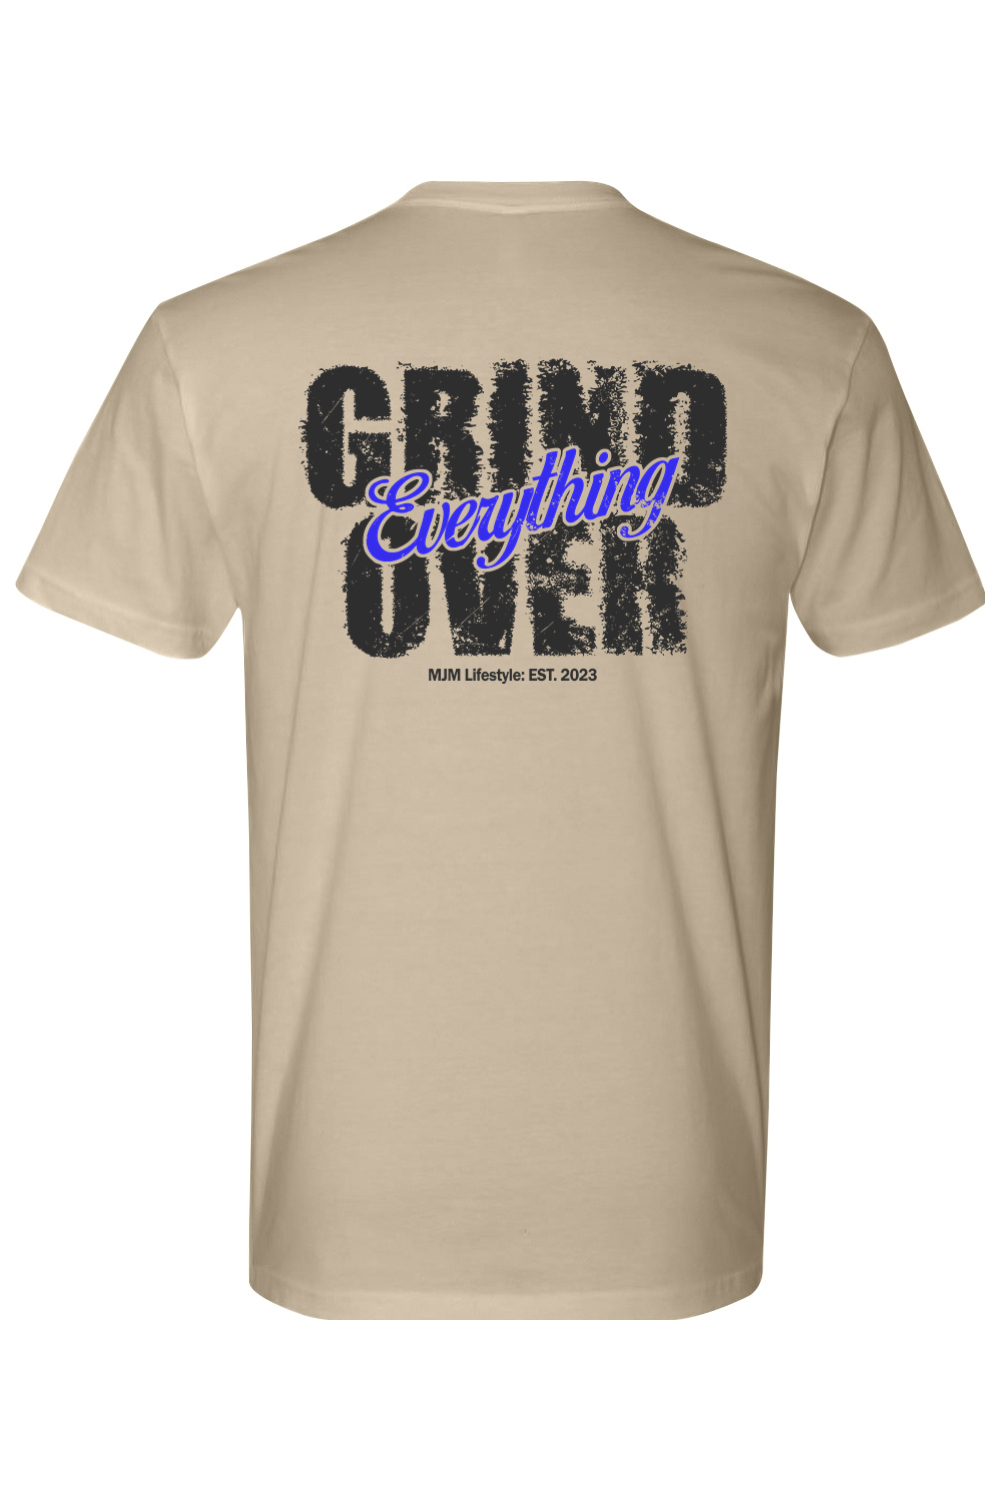 Grind Over Everything Tee